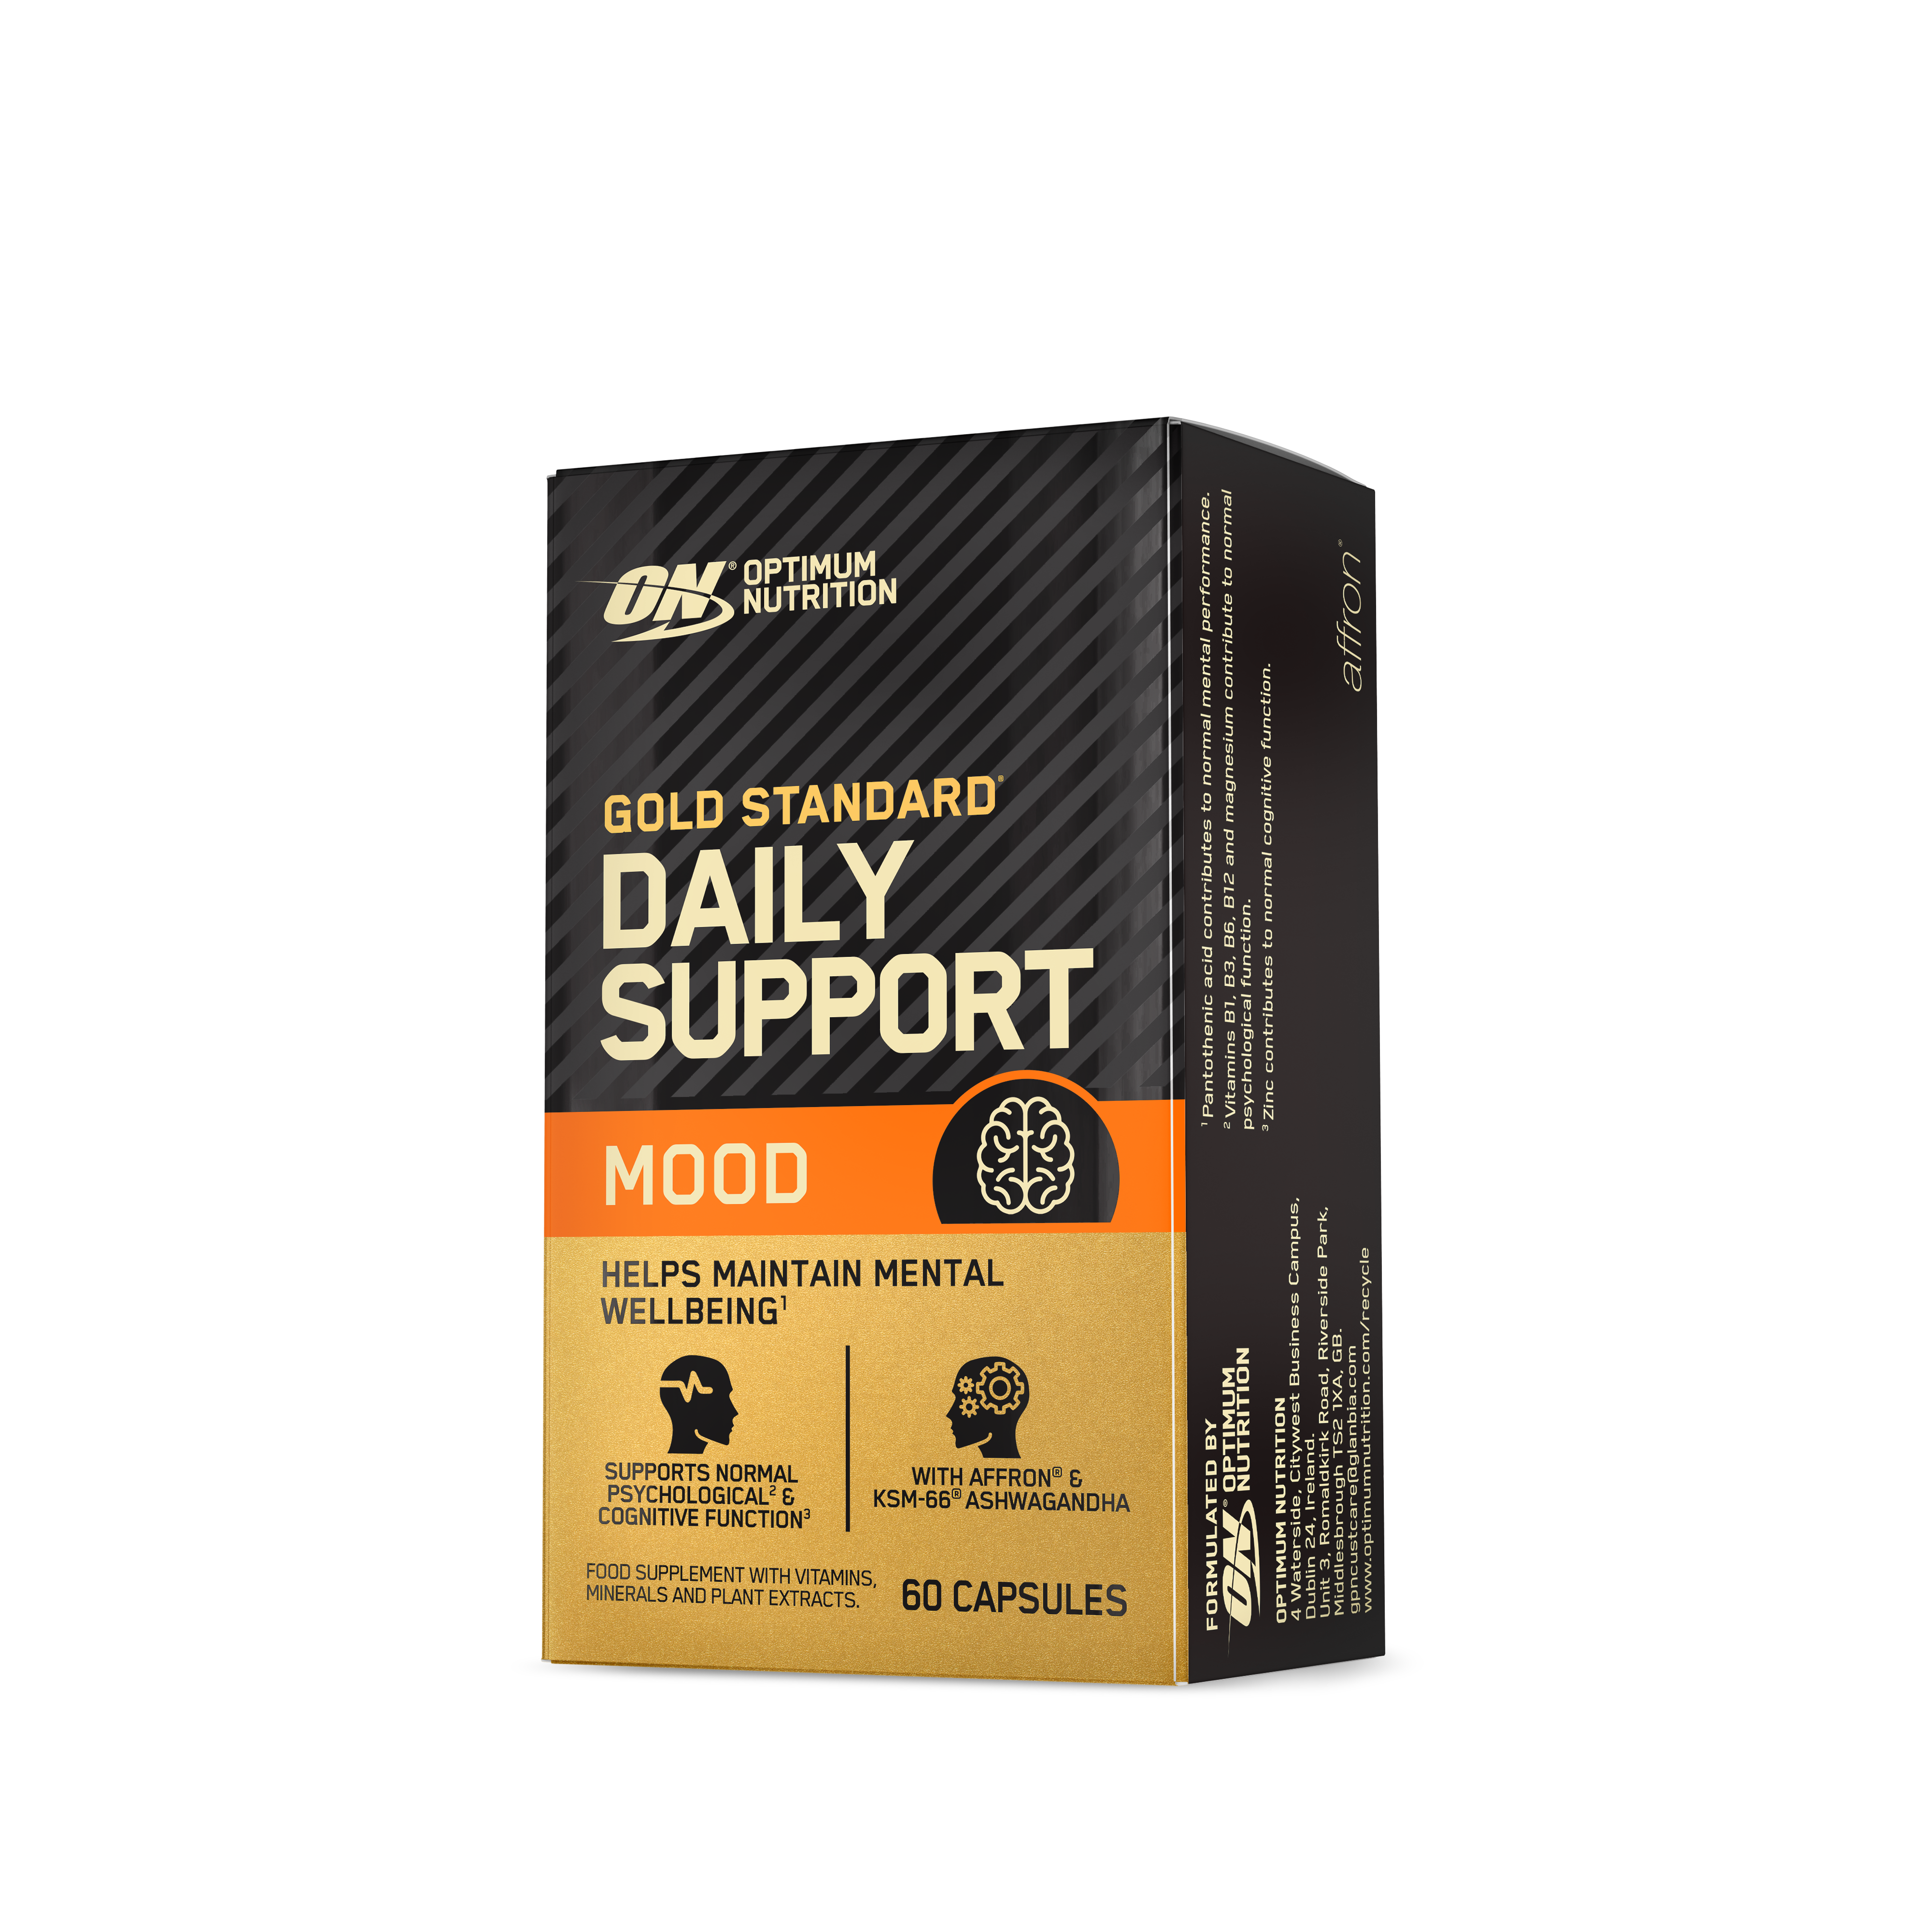 Optimum Nutrition Gold Standard Daily Support Mood - Sportsupplement - Supplement - 60 Capsules